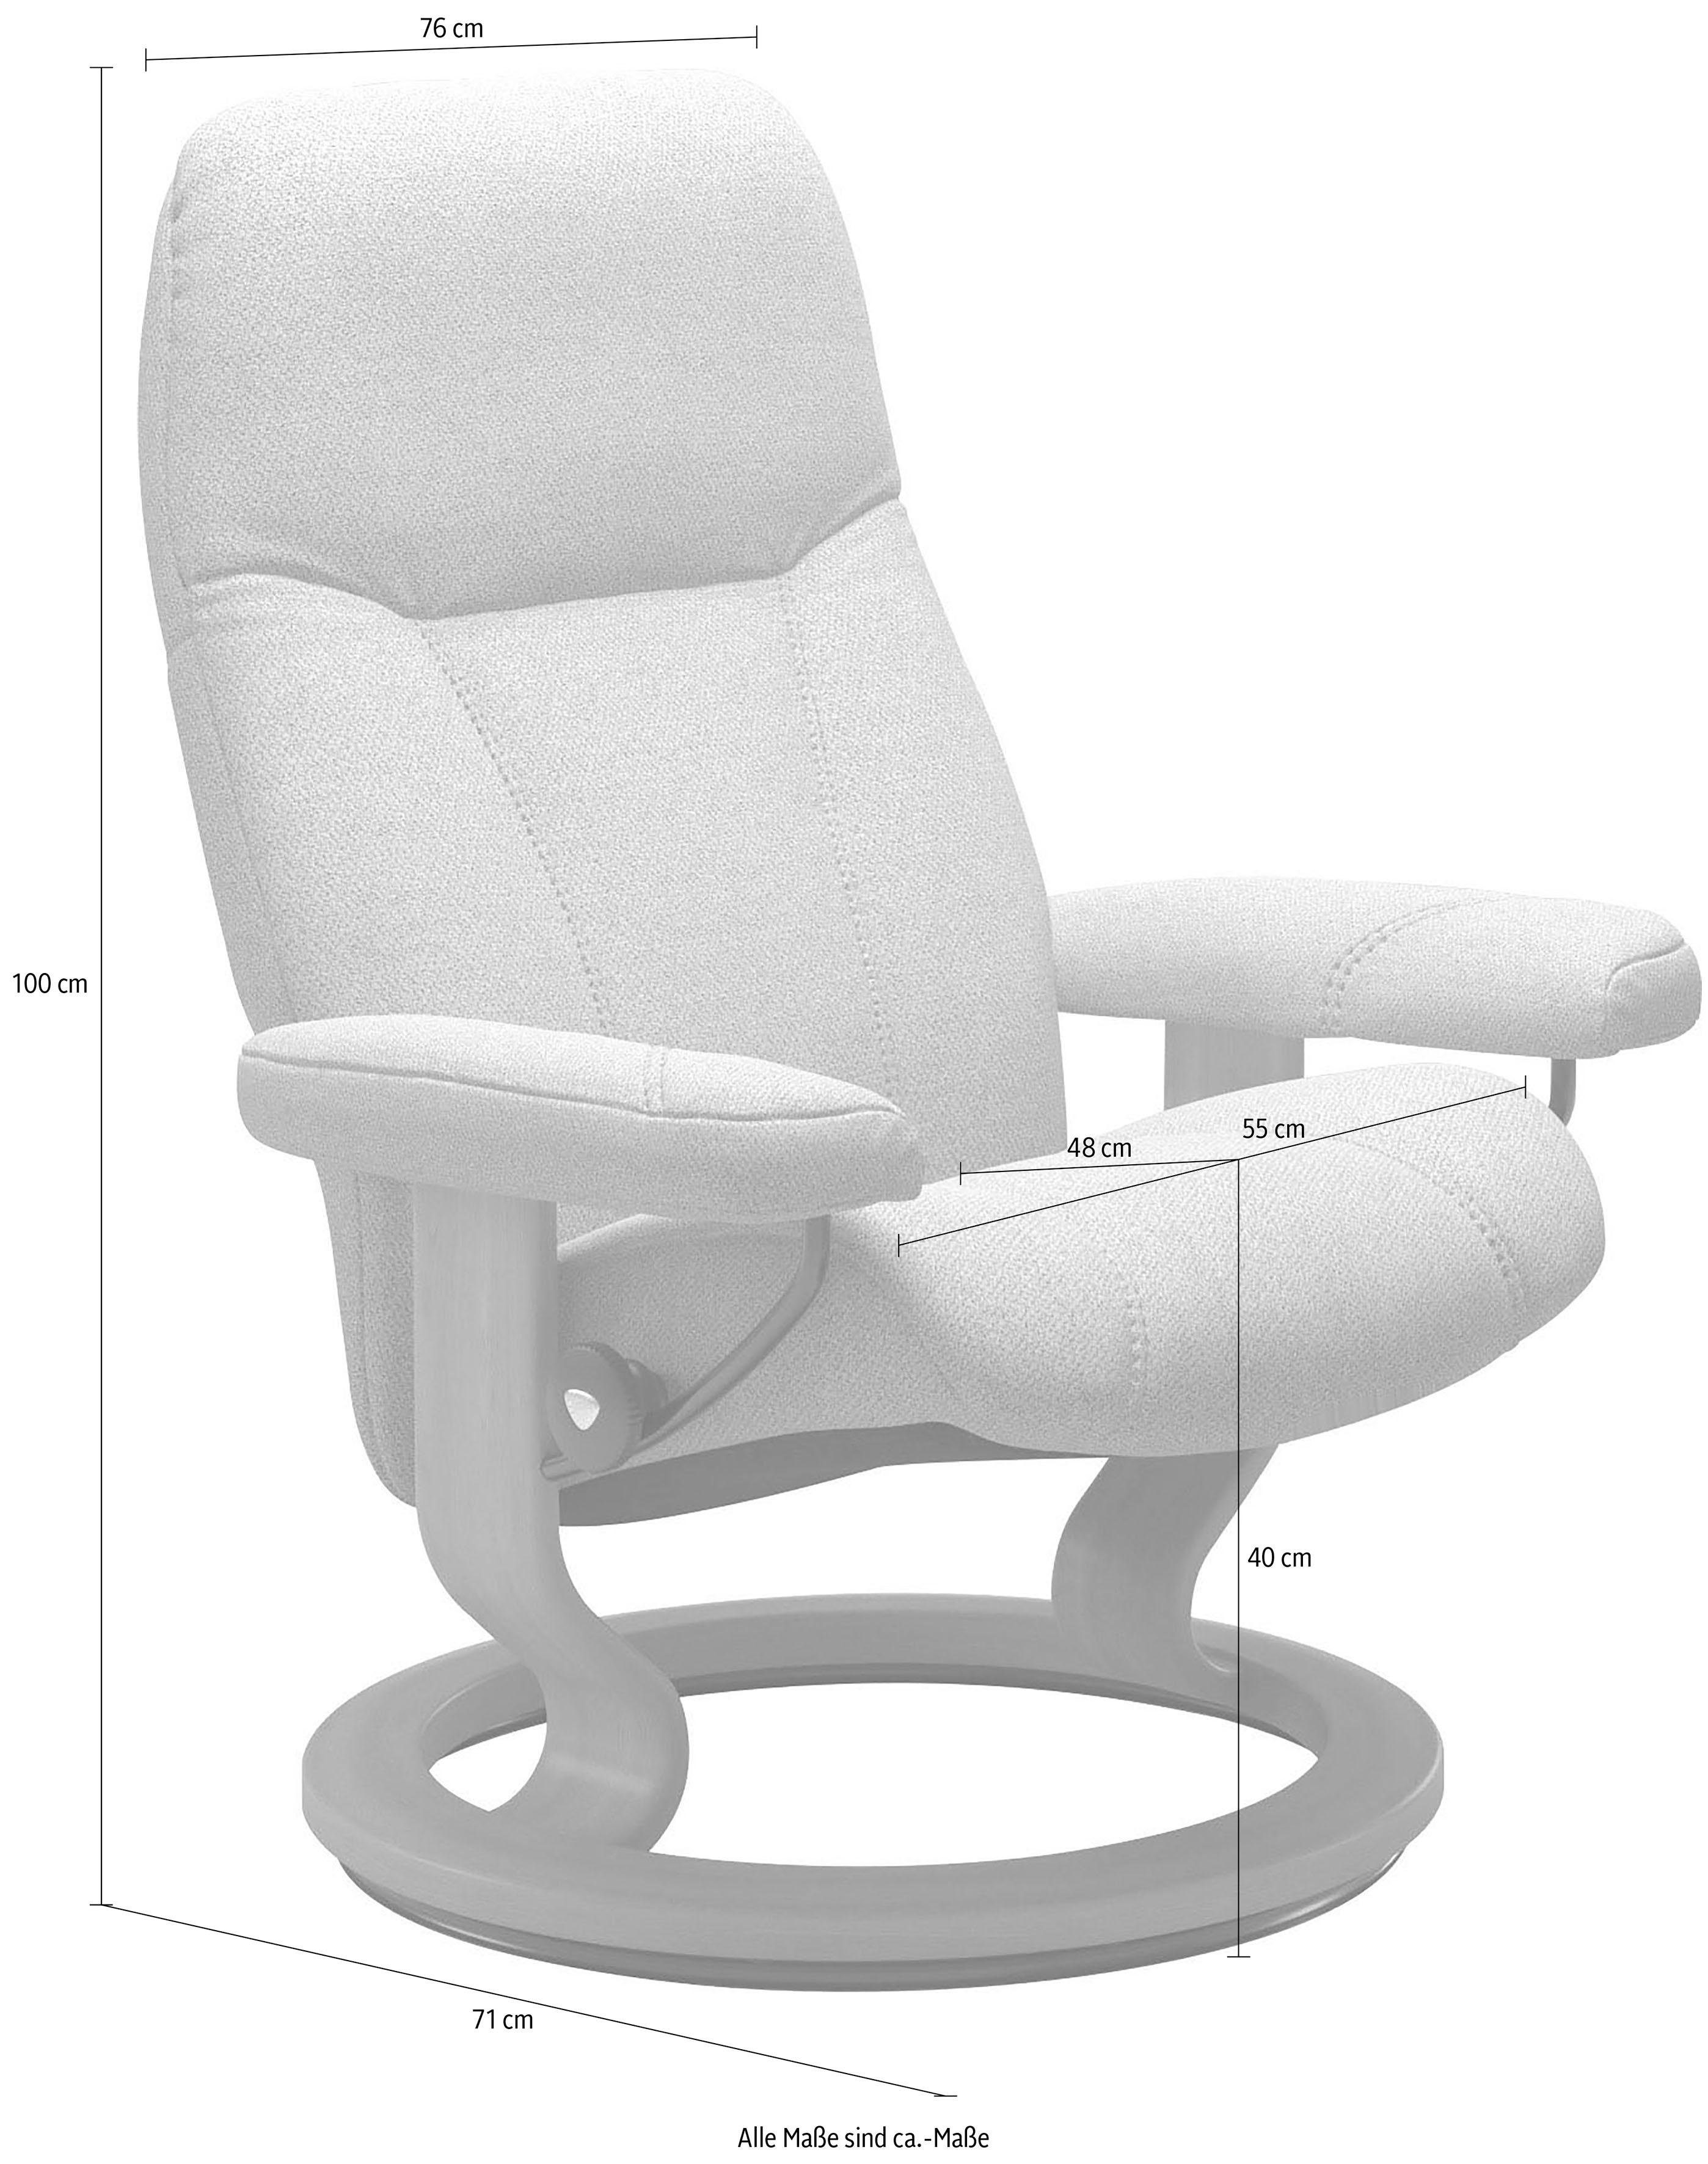 Stressless® Relaxsessel Consul, Größe M, Base, Gestell Wenge mit Classic